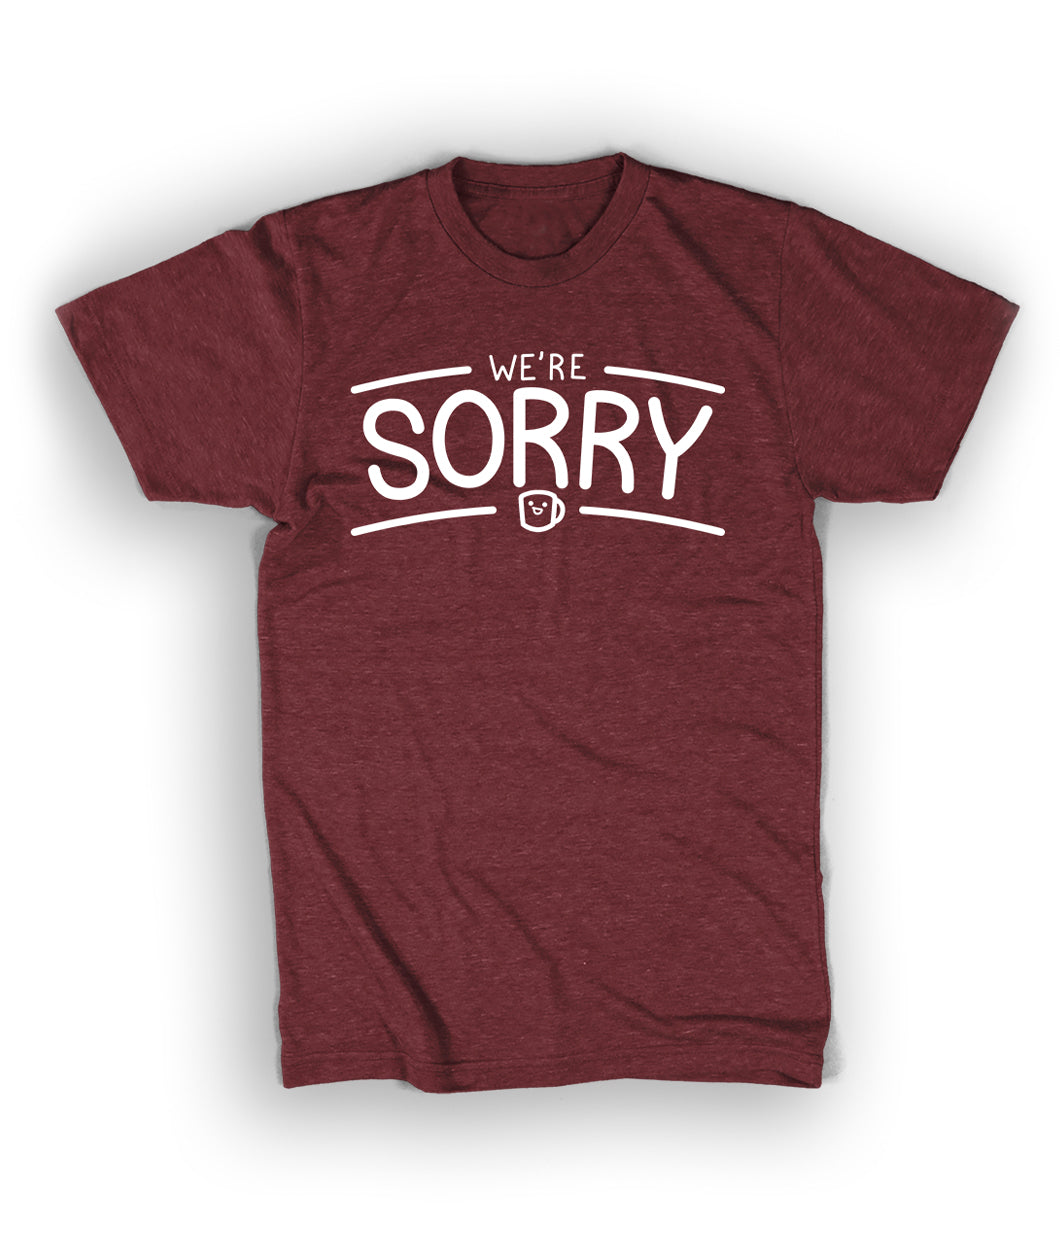 A red t-shirt the the words "We're" above the larger word "Sorry". A small Drawfee logo mug is below the word "Sorry". 